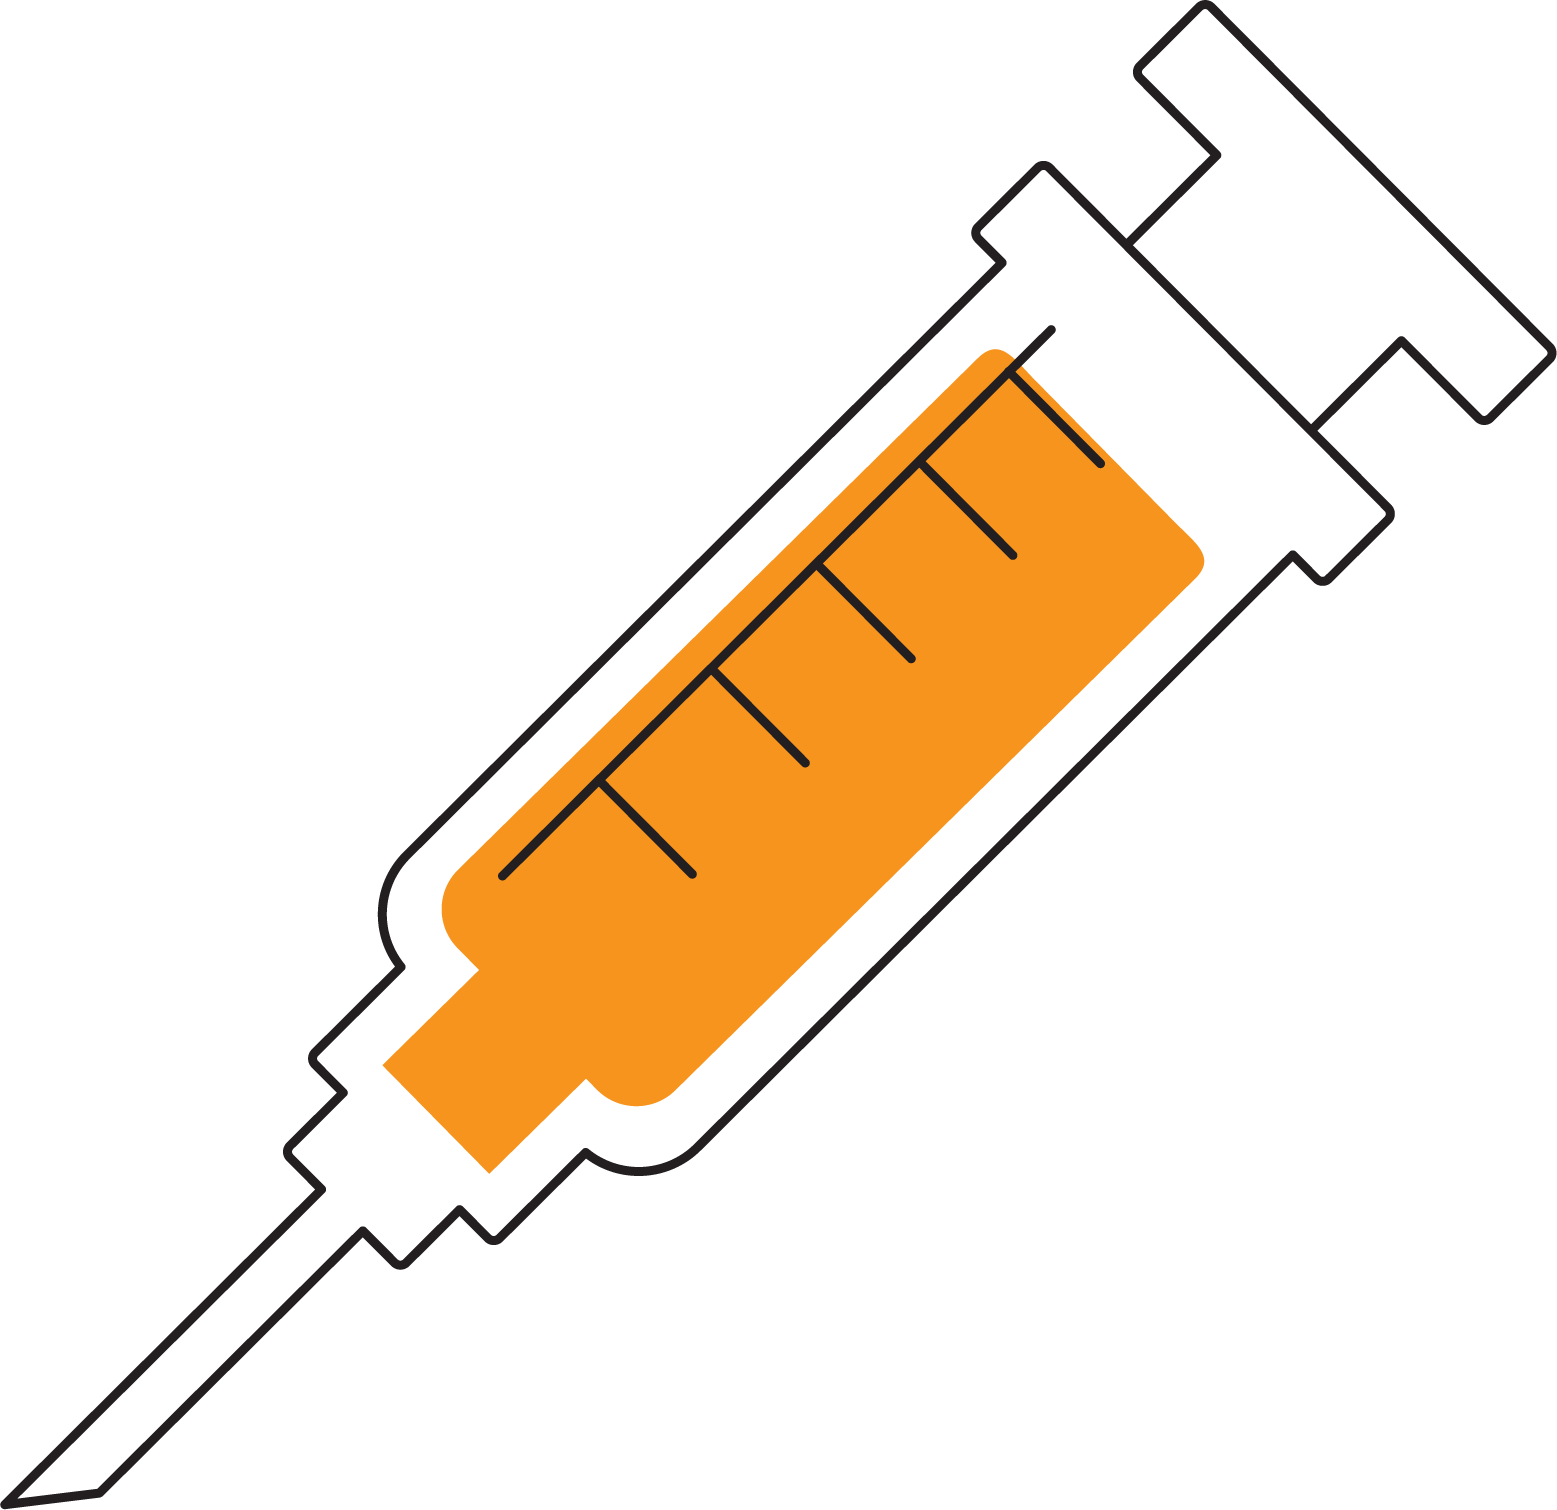 Needle clipart parallel. Syringe injection hypodermic clip